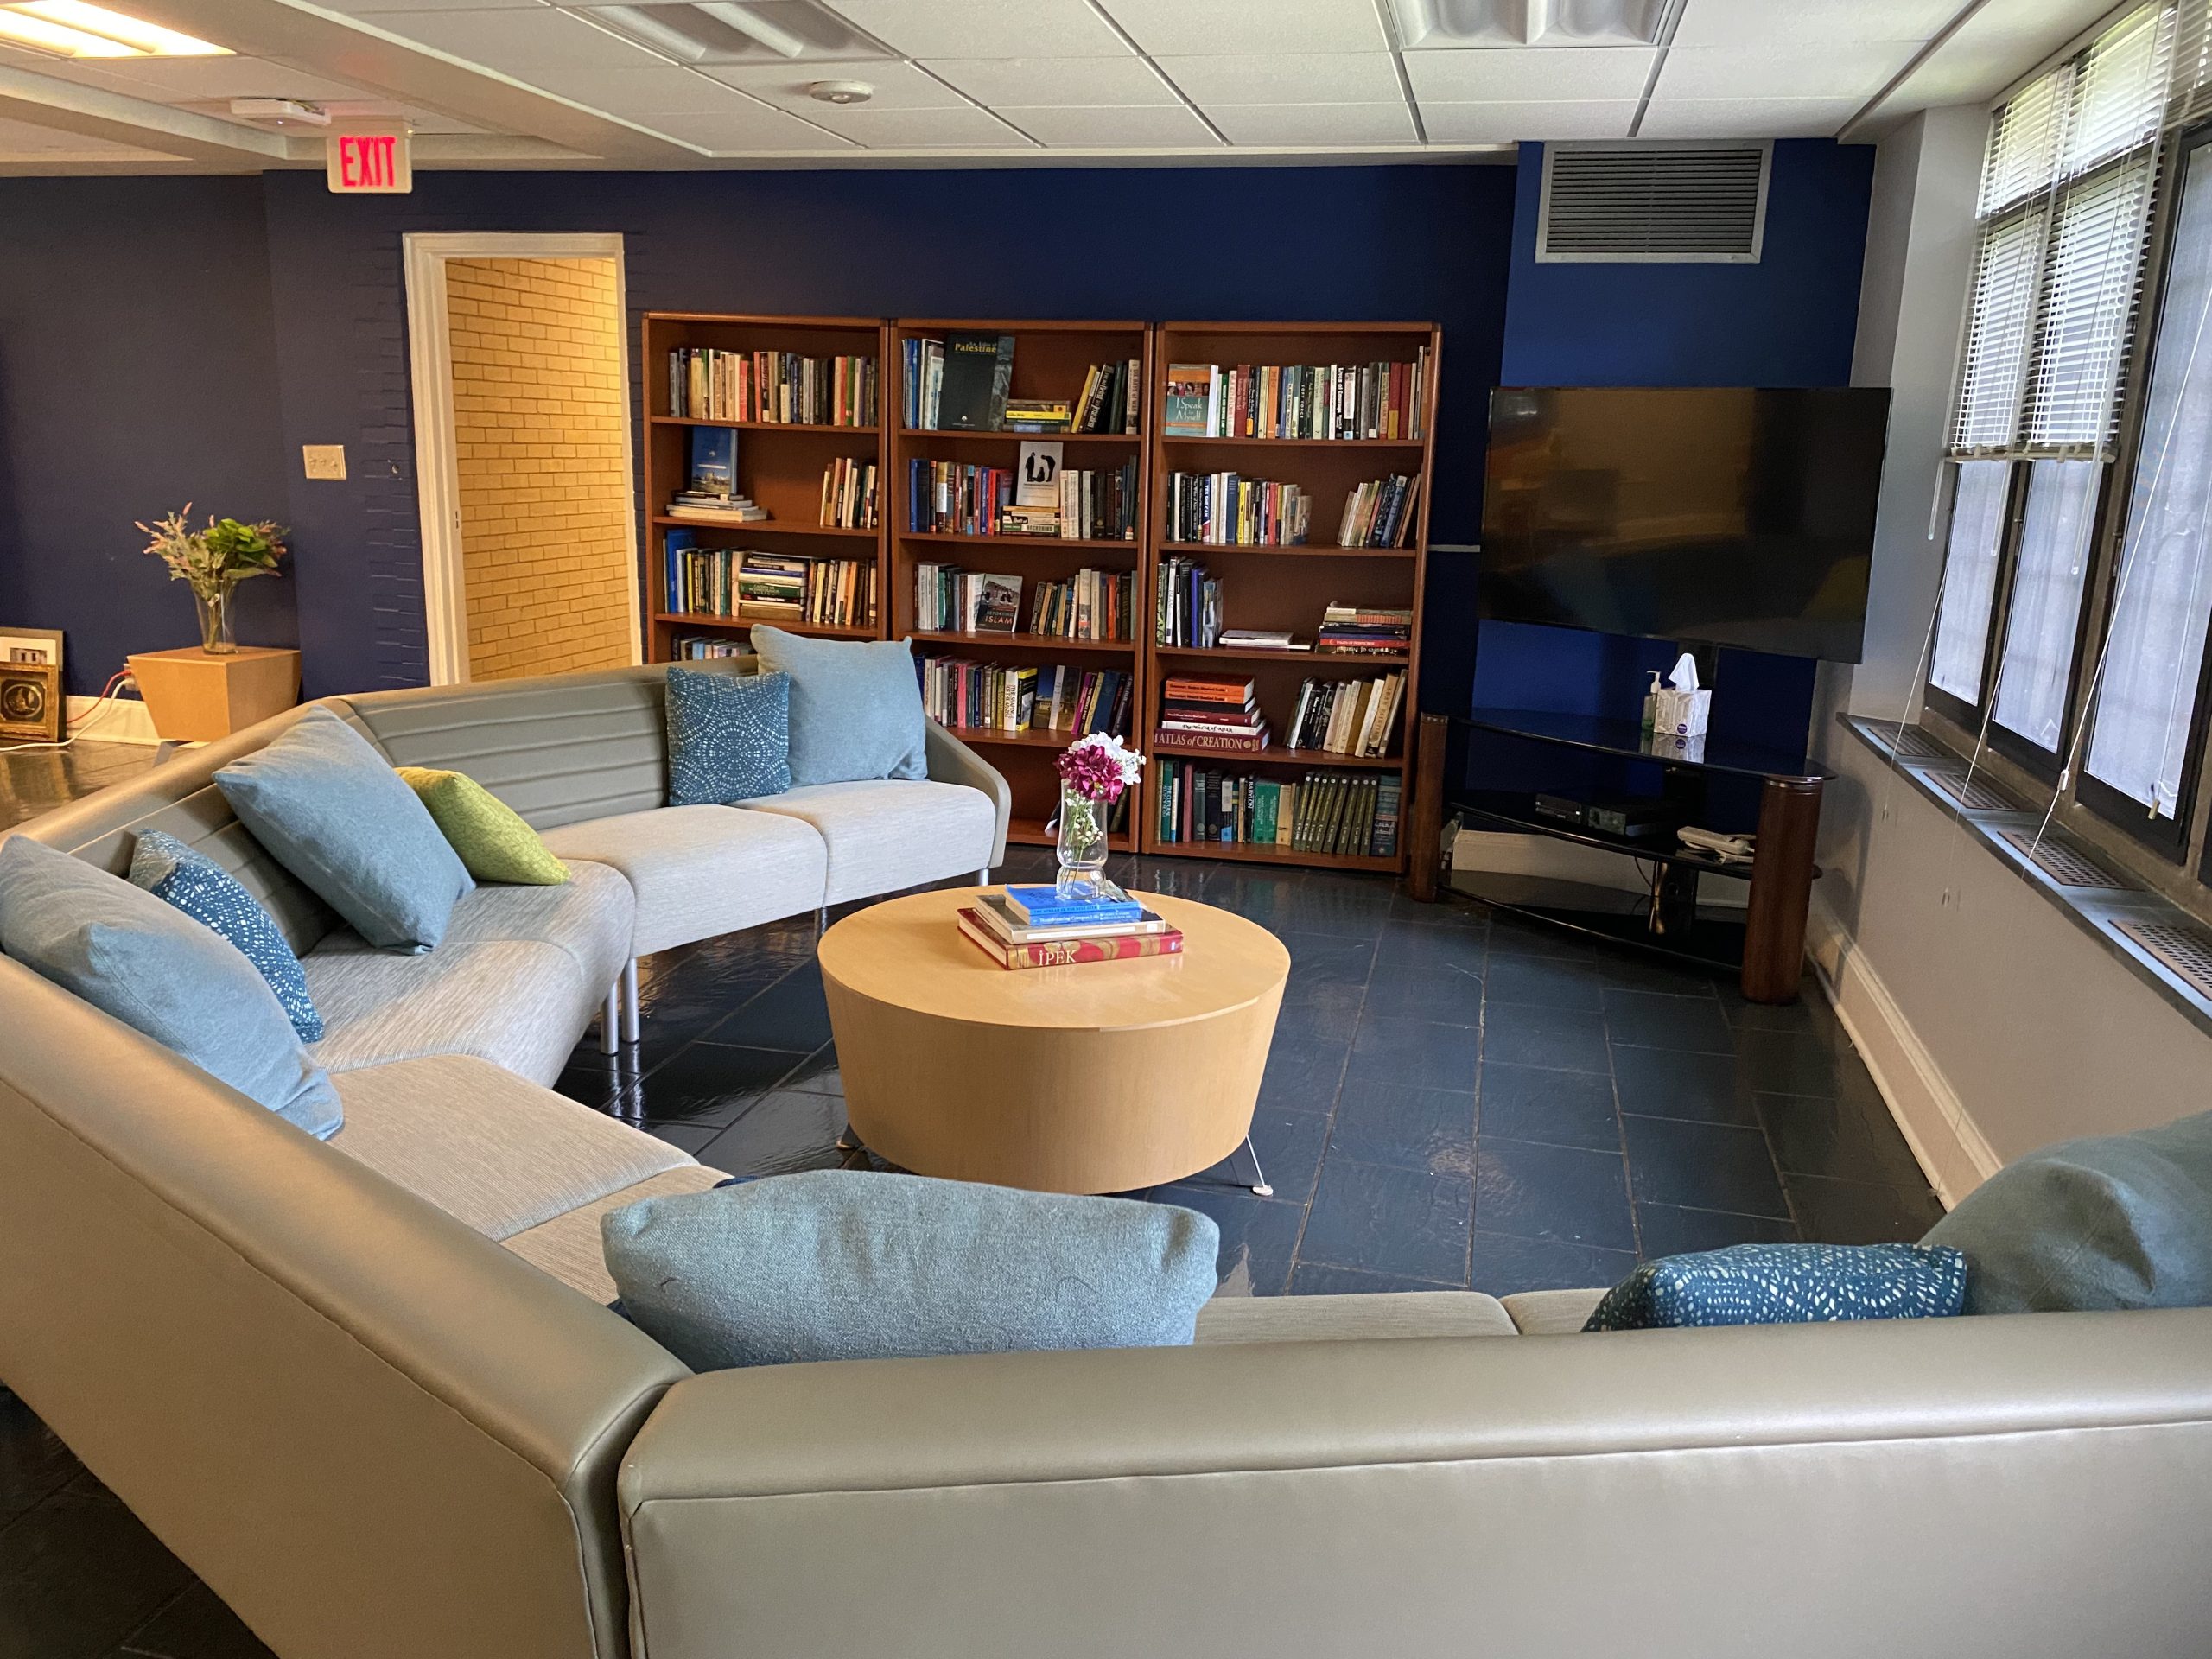 CML lounge with a tv and bookcases